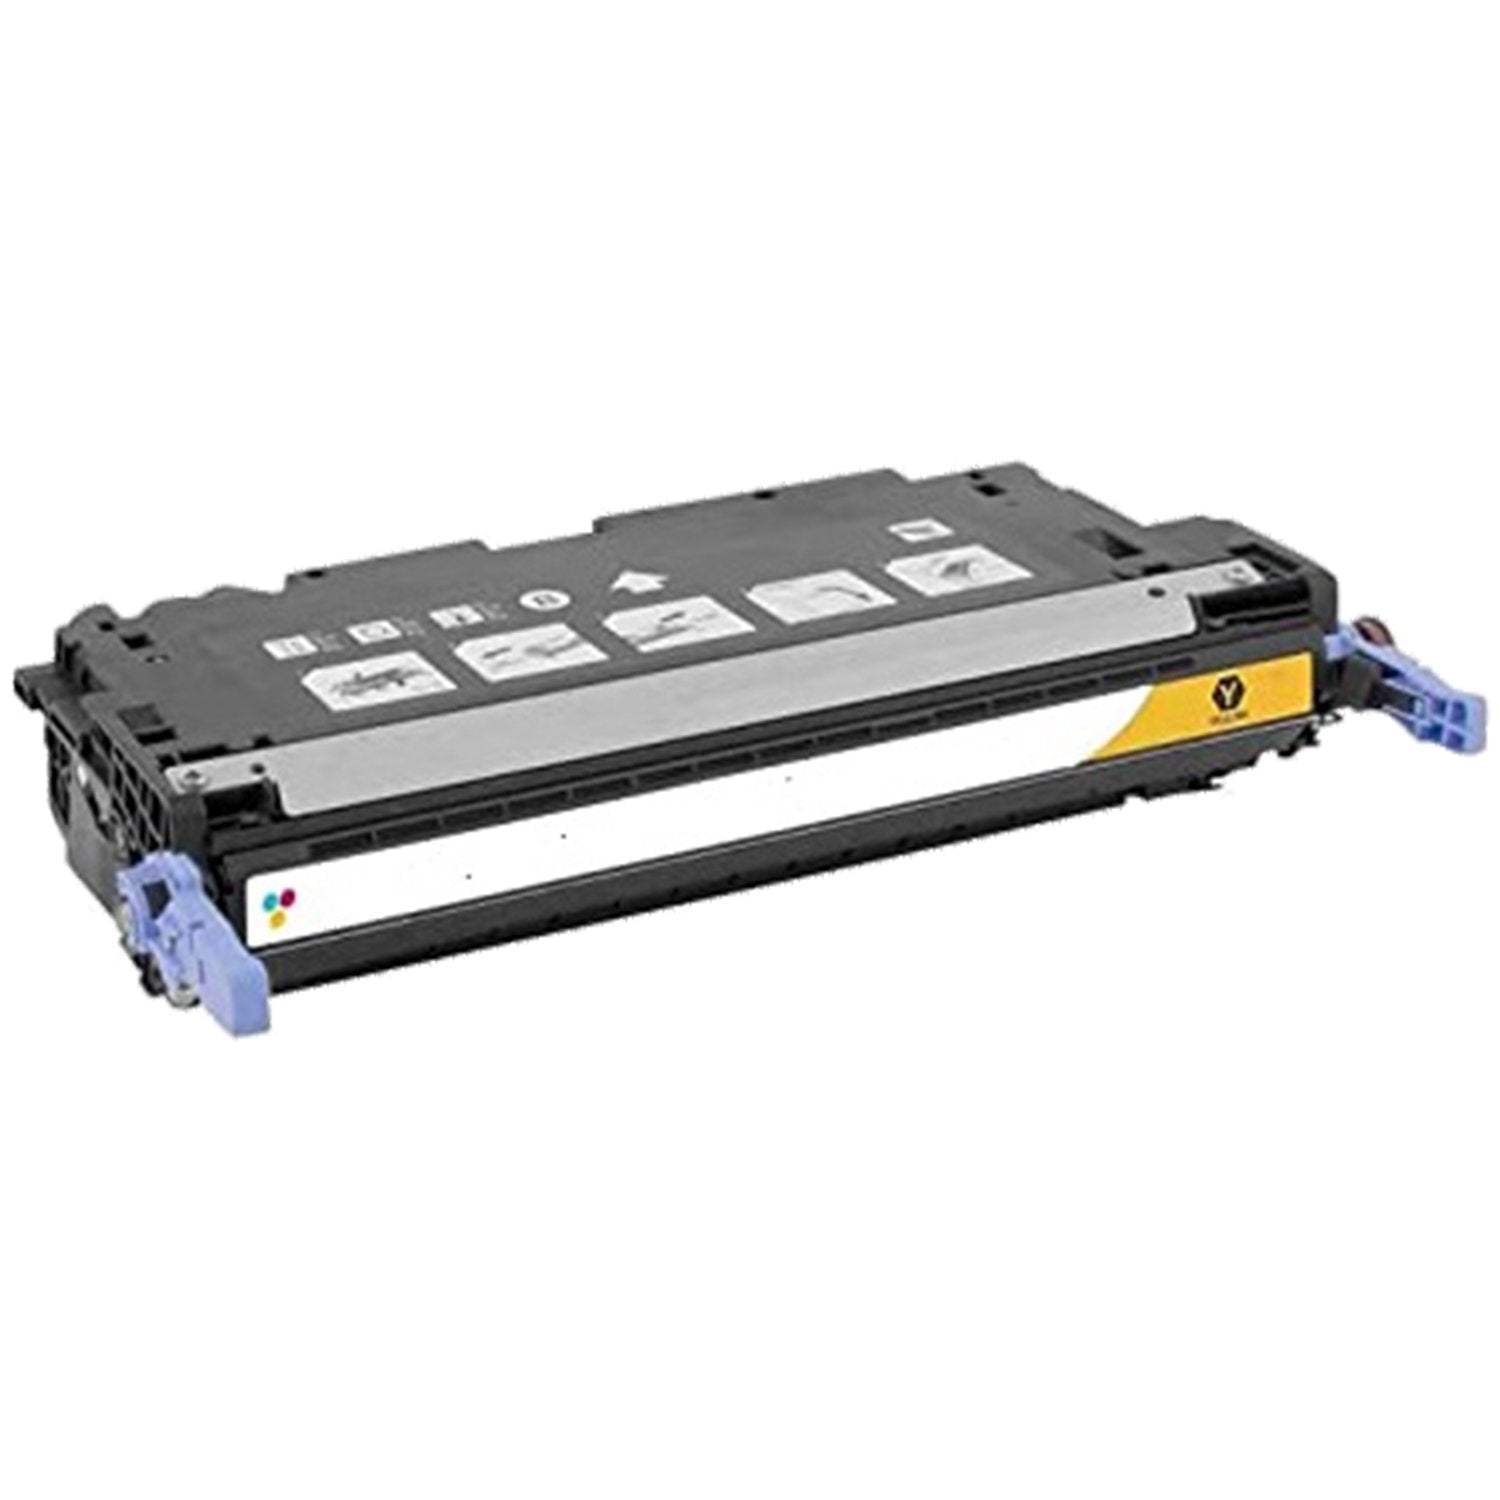 Absolute Toner Compatible Canon 111 Yellow Toner Cartridge 1657B008 | Absolute Toner Canon Toner Cartridges